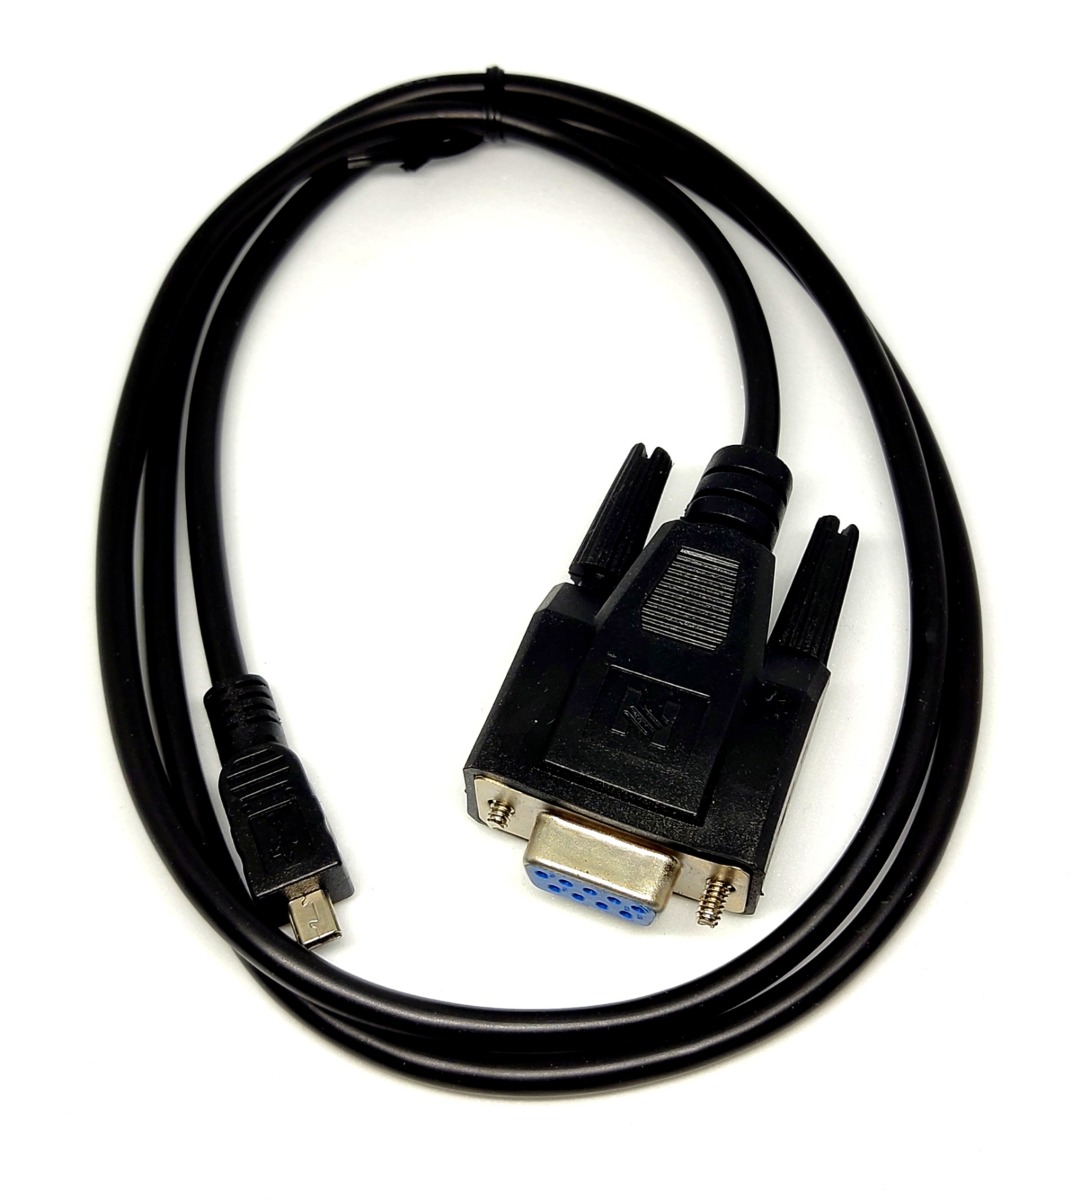 Interface serial RS-232 cable for Rongta mobile POS printer with mini-USB 8P connector